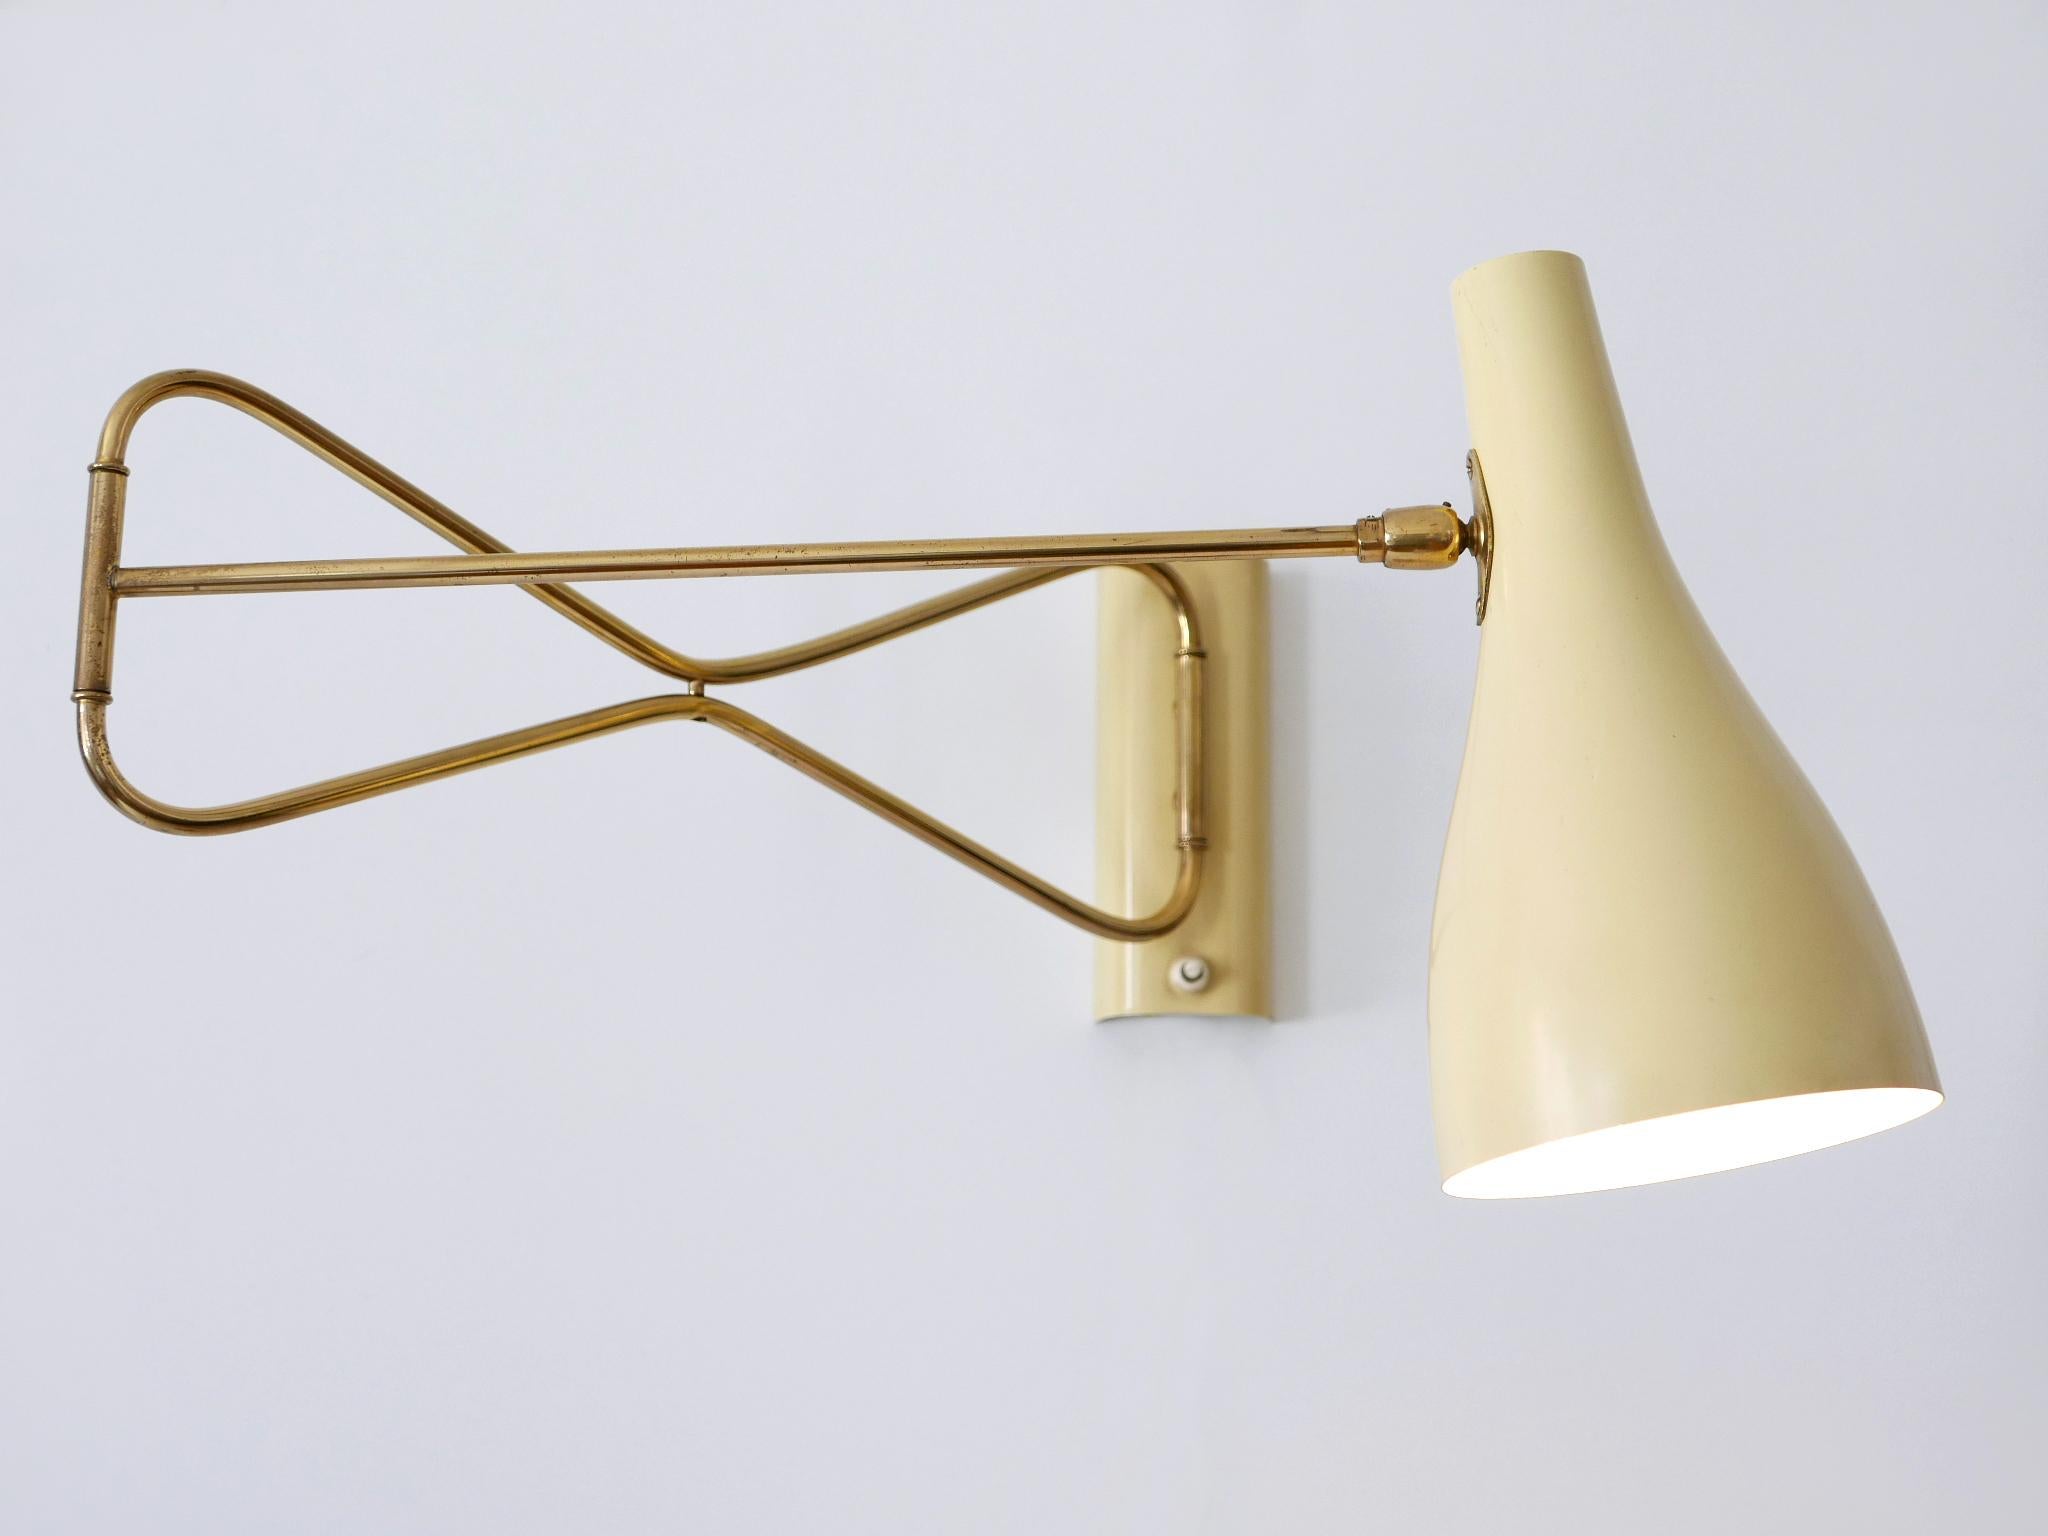 Aluminum Rare & Elegant Mid Century Modern Wall Lamp '9590/28' by Cosack Germany 1950s For Sale